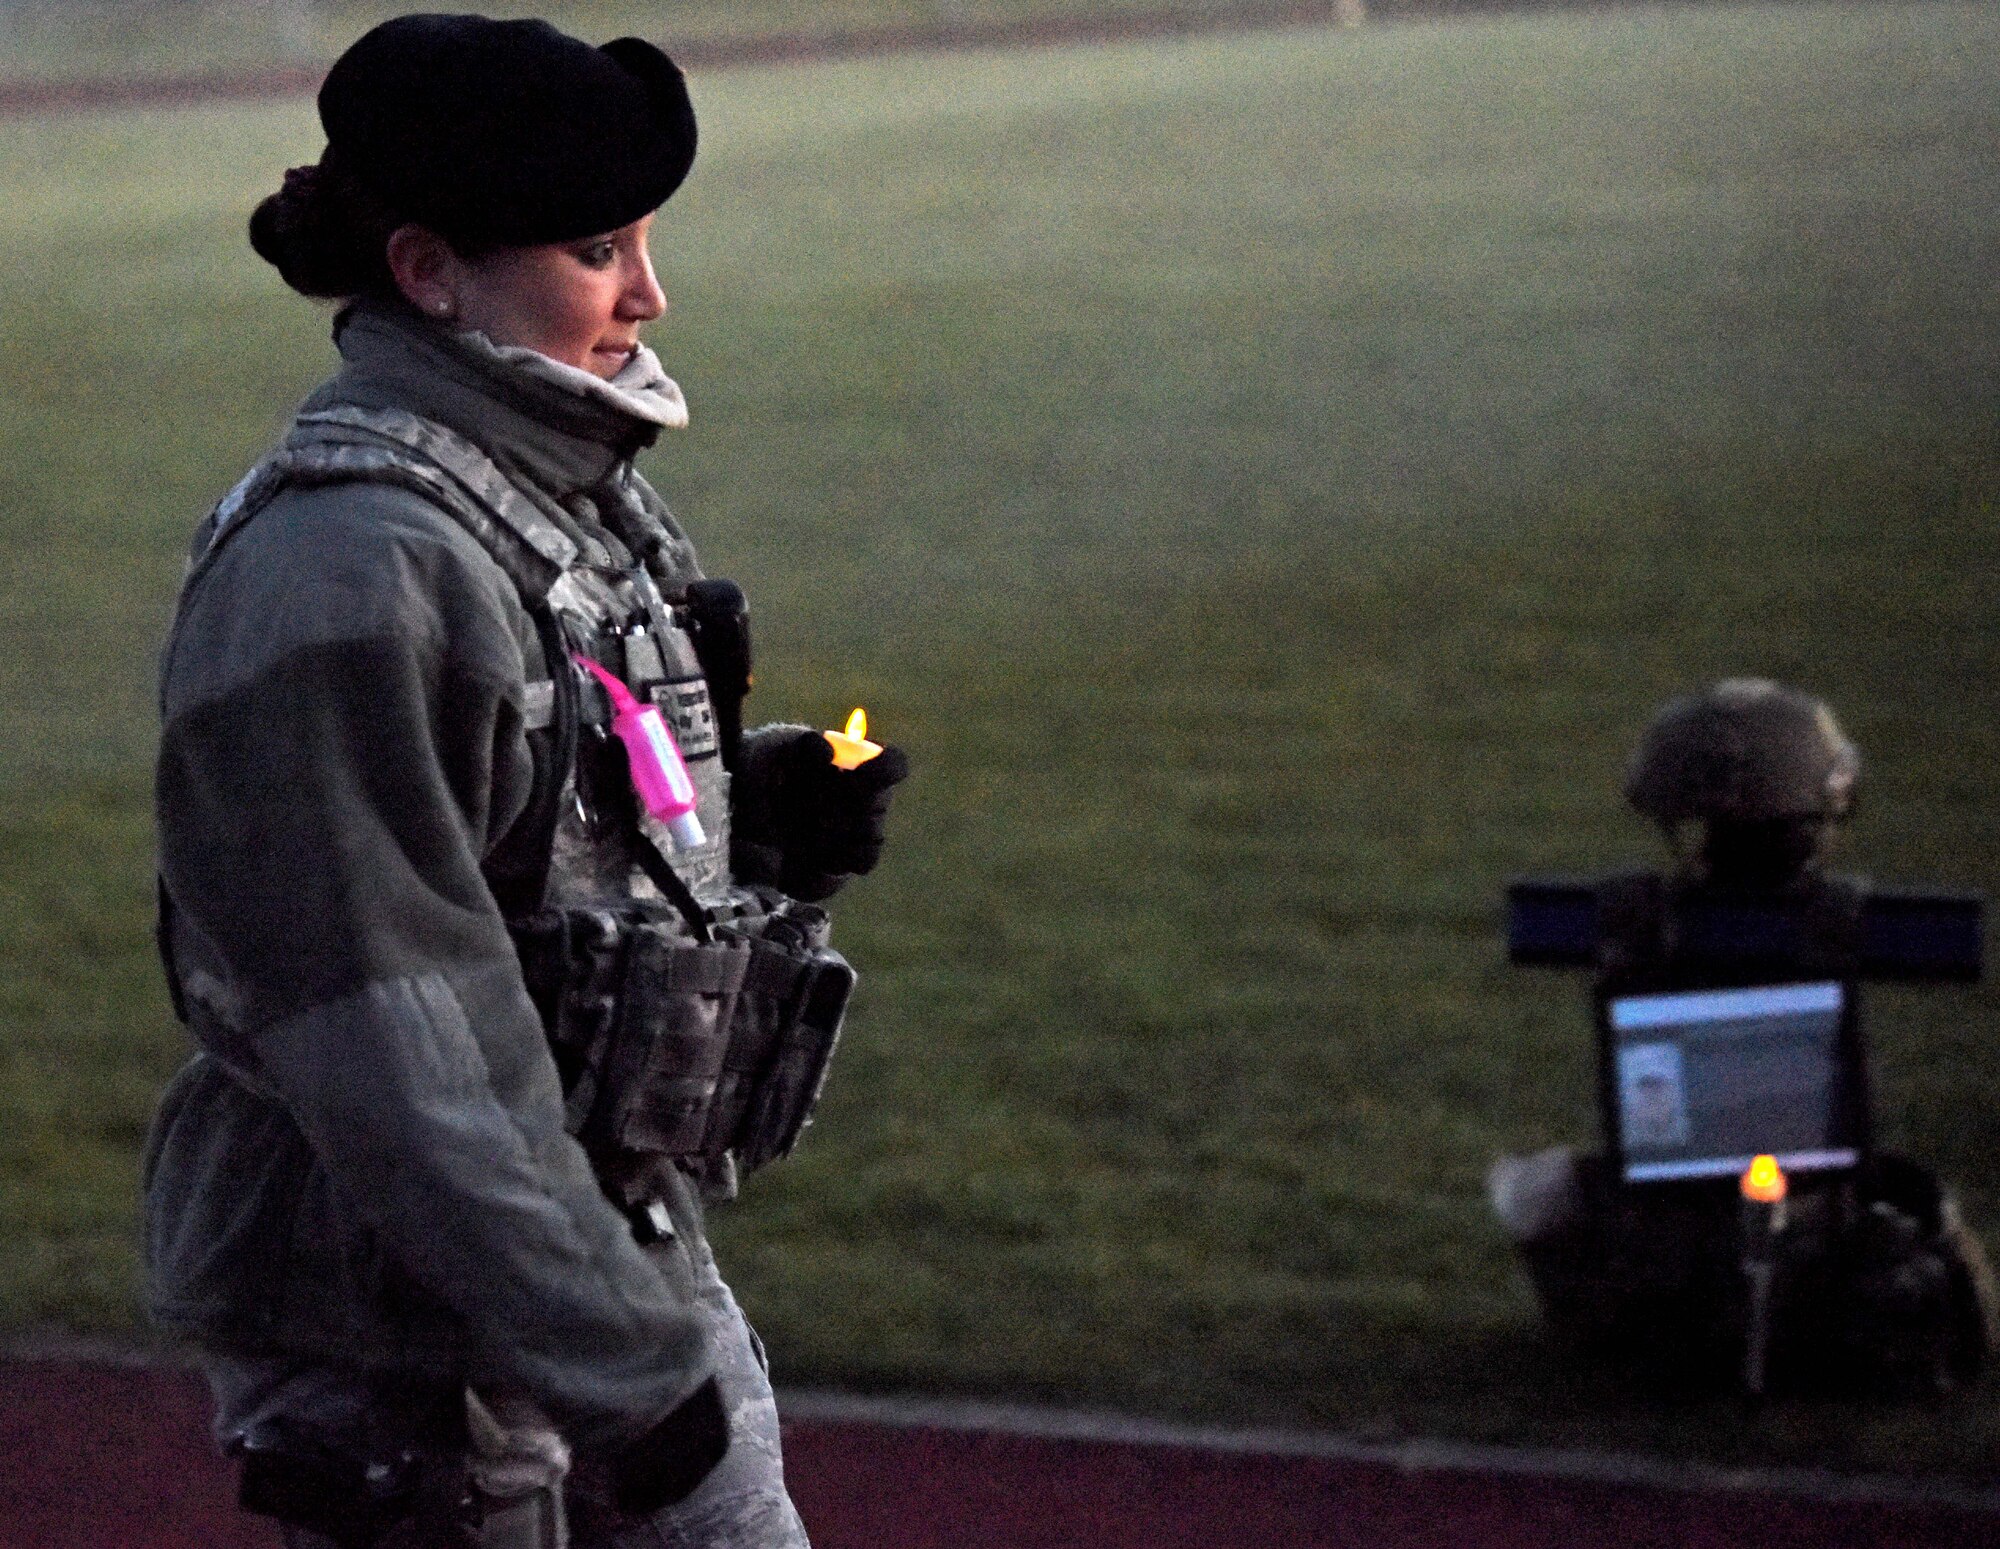 Master Sgt. Rebecca Swift, 100th Security Forces Squadron flight chief, walks during a candlelight vigil to honor the “Fallen 14” during events to commemorate National Police Week at RAF Mildenhall, England, May 14, 2020. The Fallen 14 represents the number of SF Airmen who’ve lost their lives in the line of duty since 9/11. (U.S. Air Force photo by Senior Airman Brandon Esau)